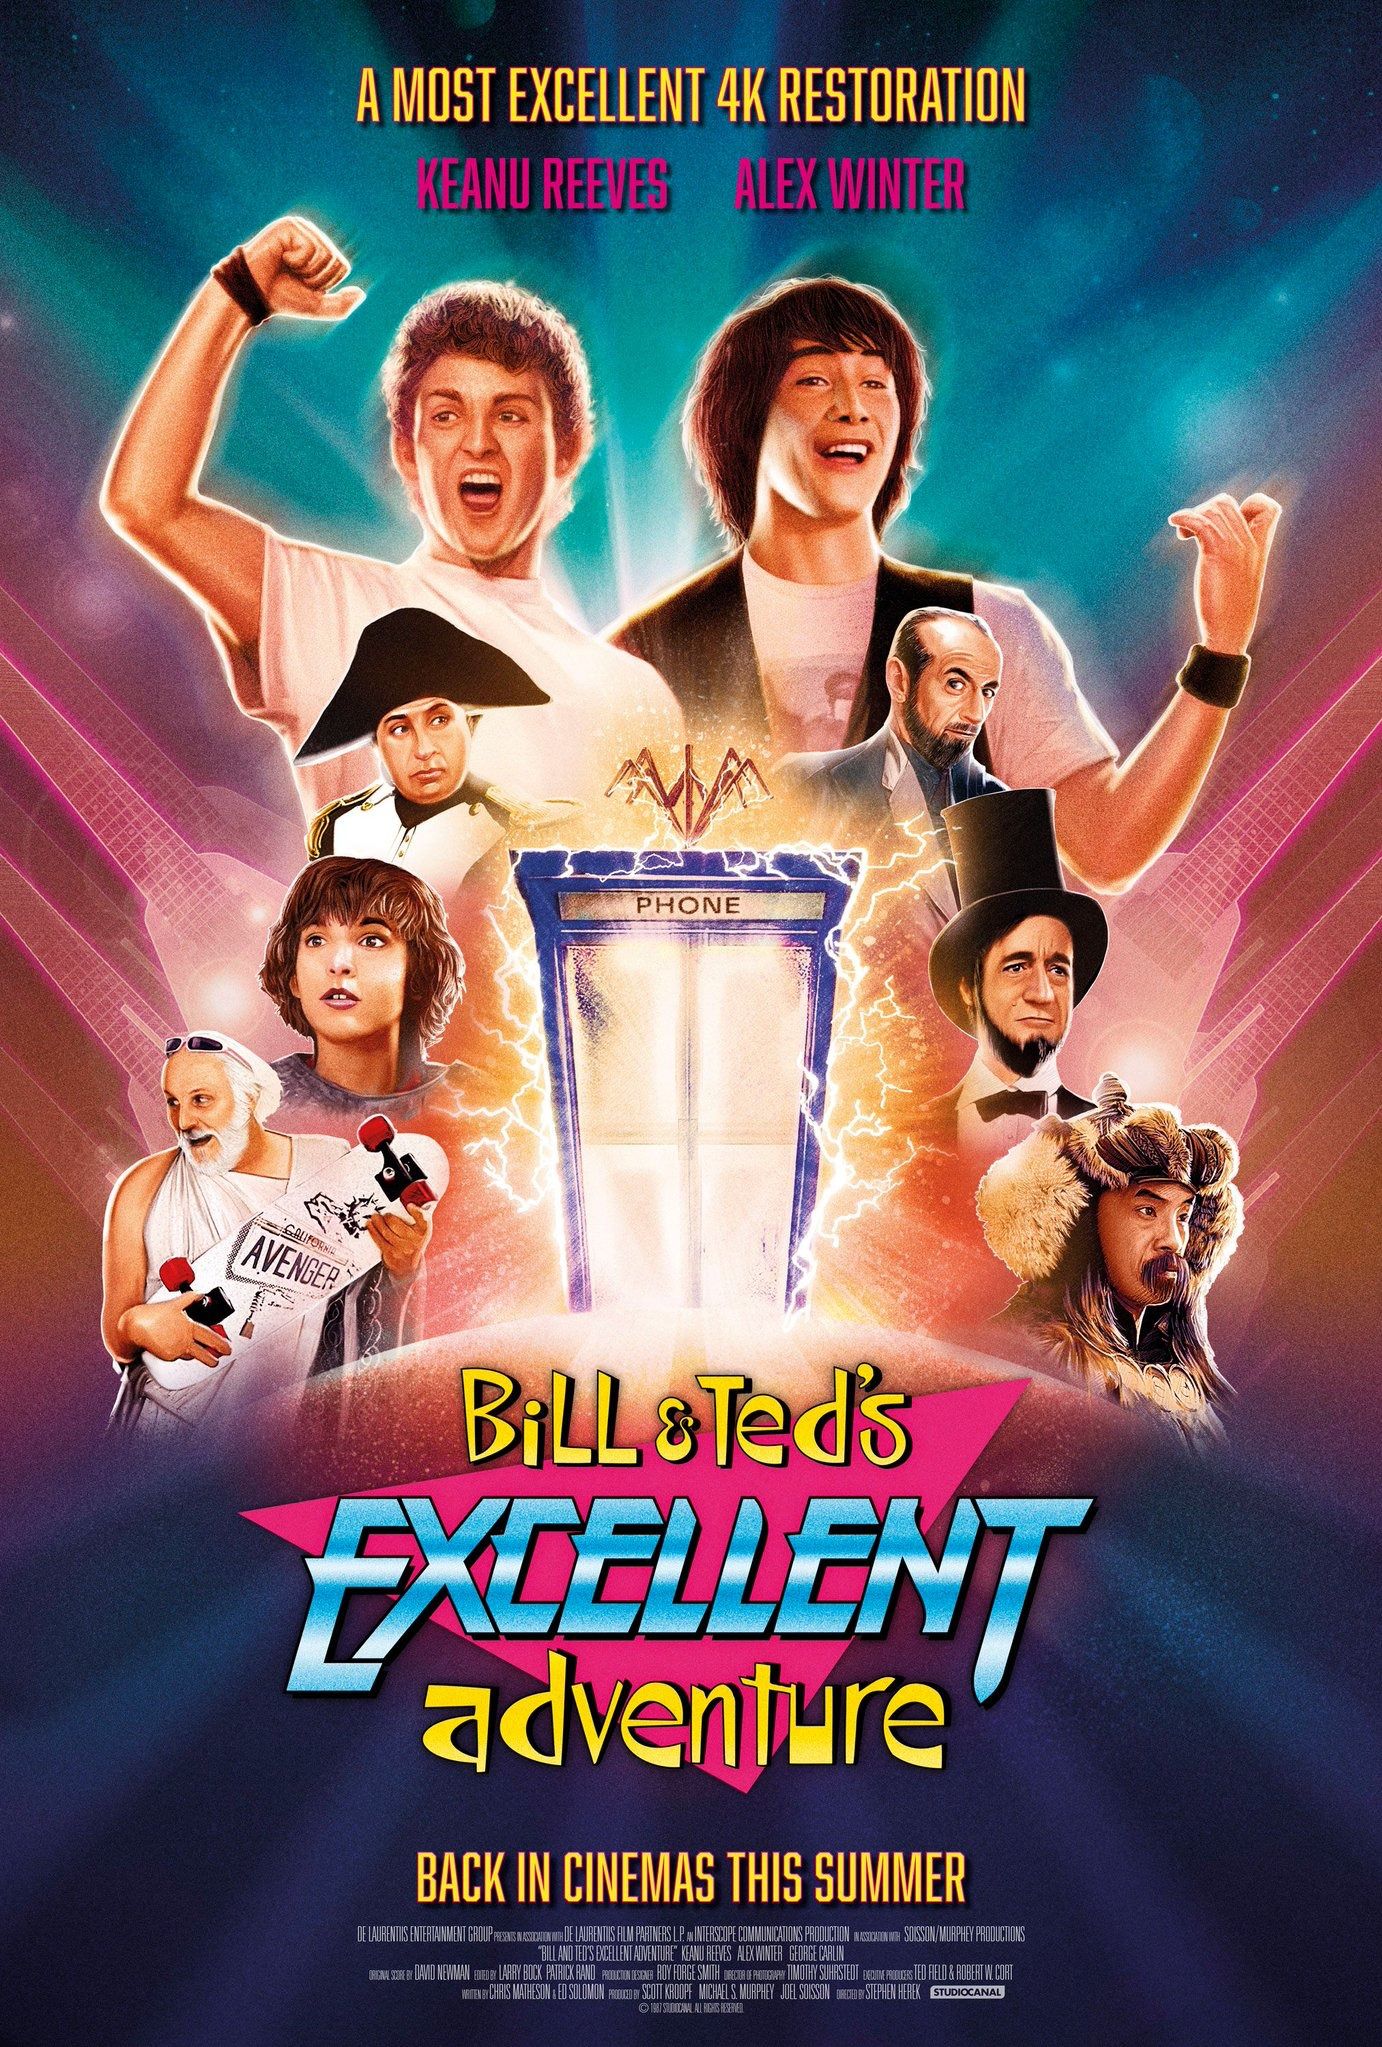 Bill and Ted's Excellent Adventure 4K poster